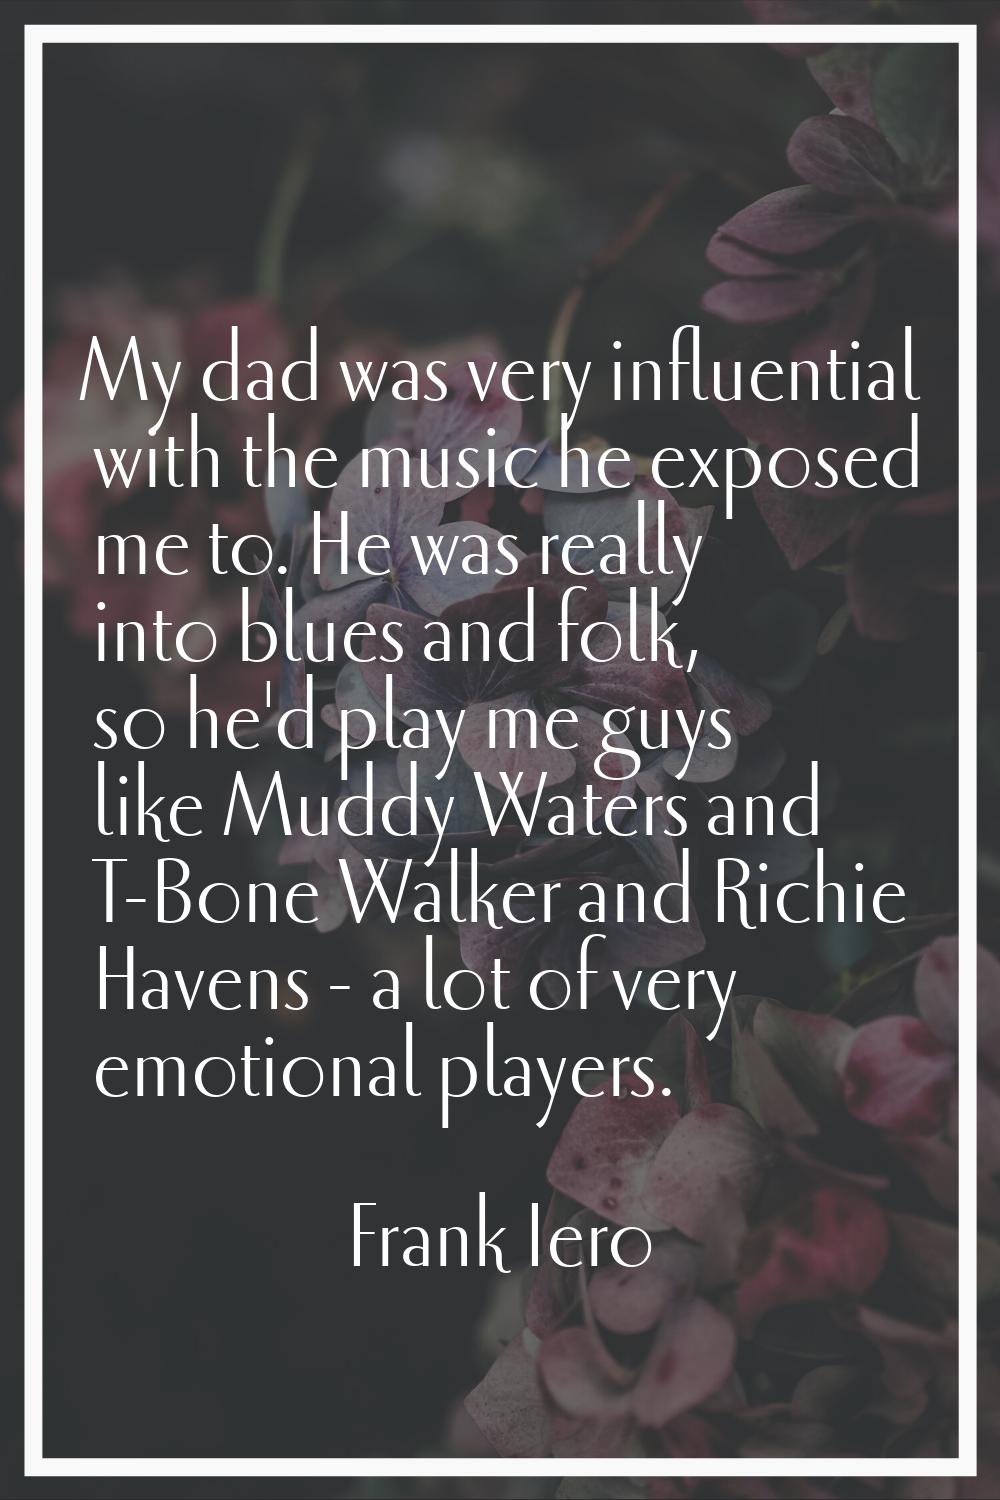 My dad was very influential with the music he exposed me to. He was really into blues and folk, so 